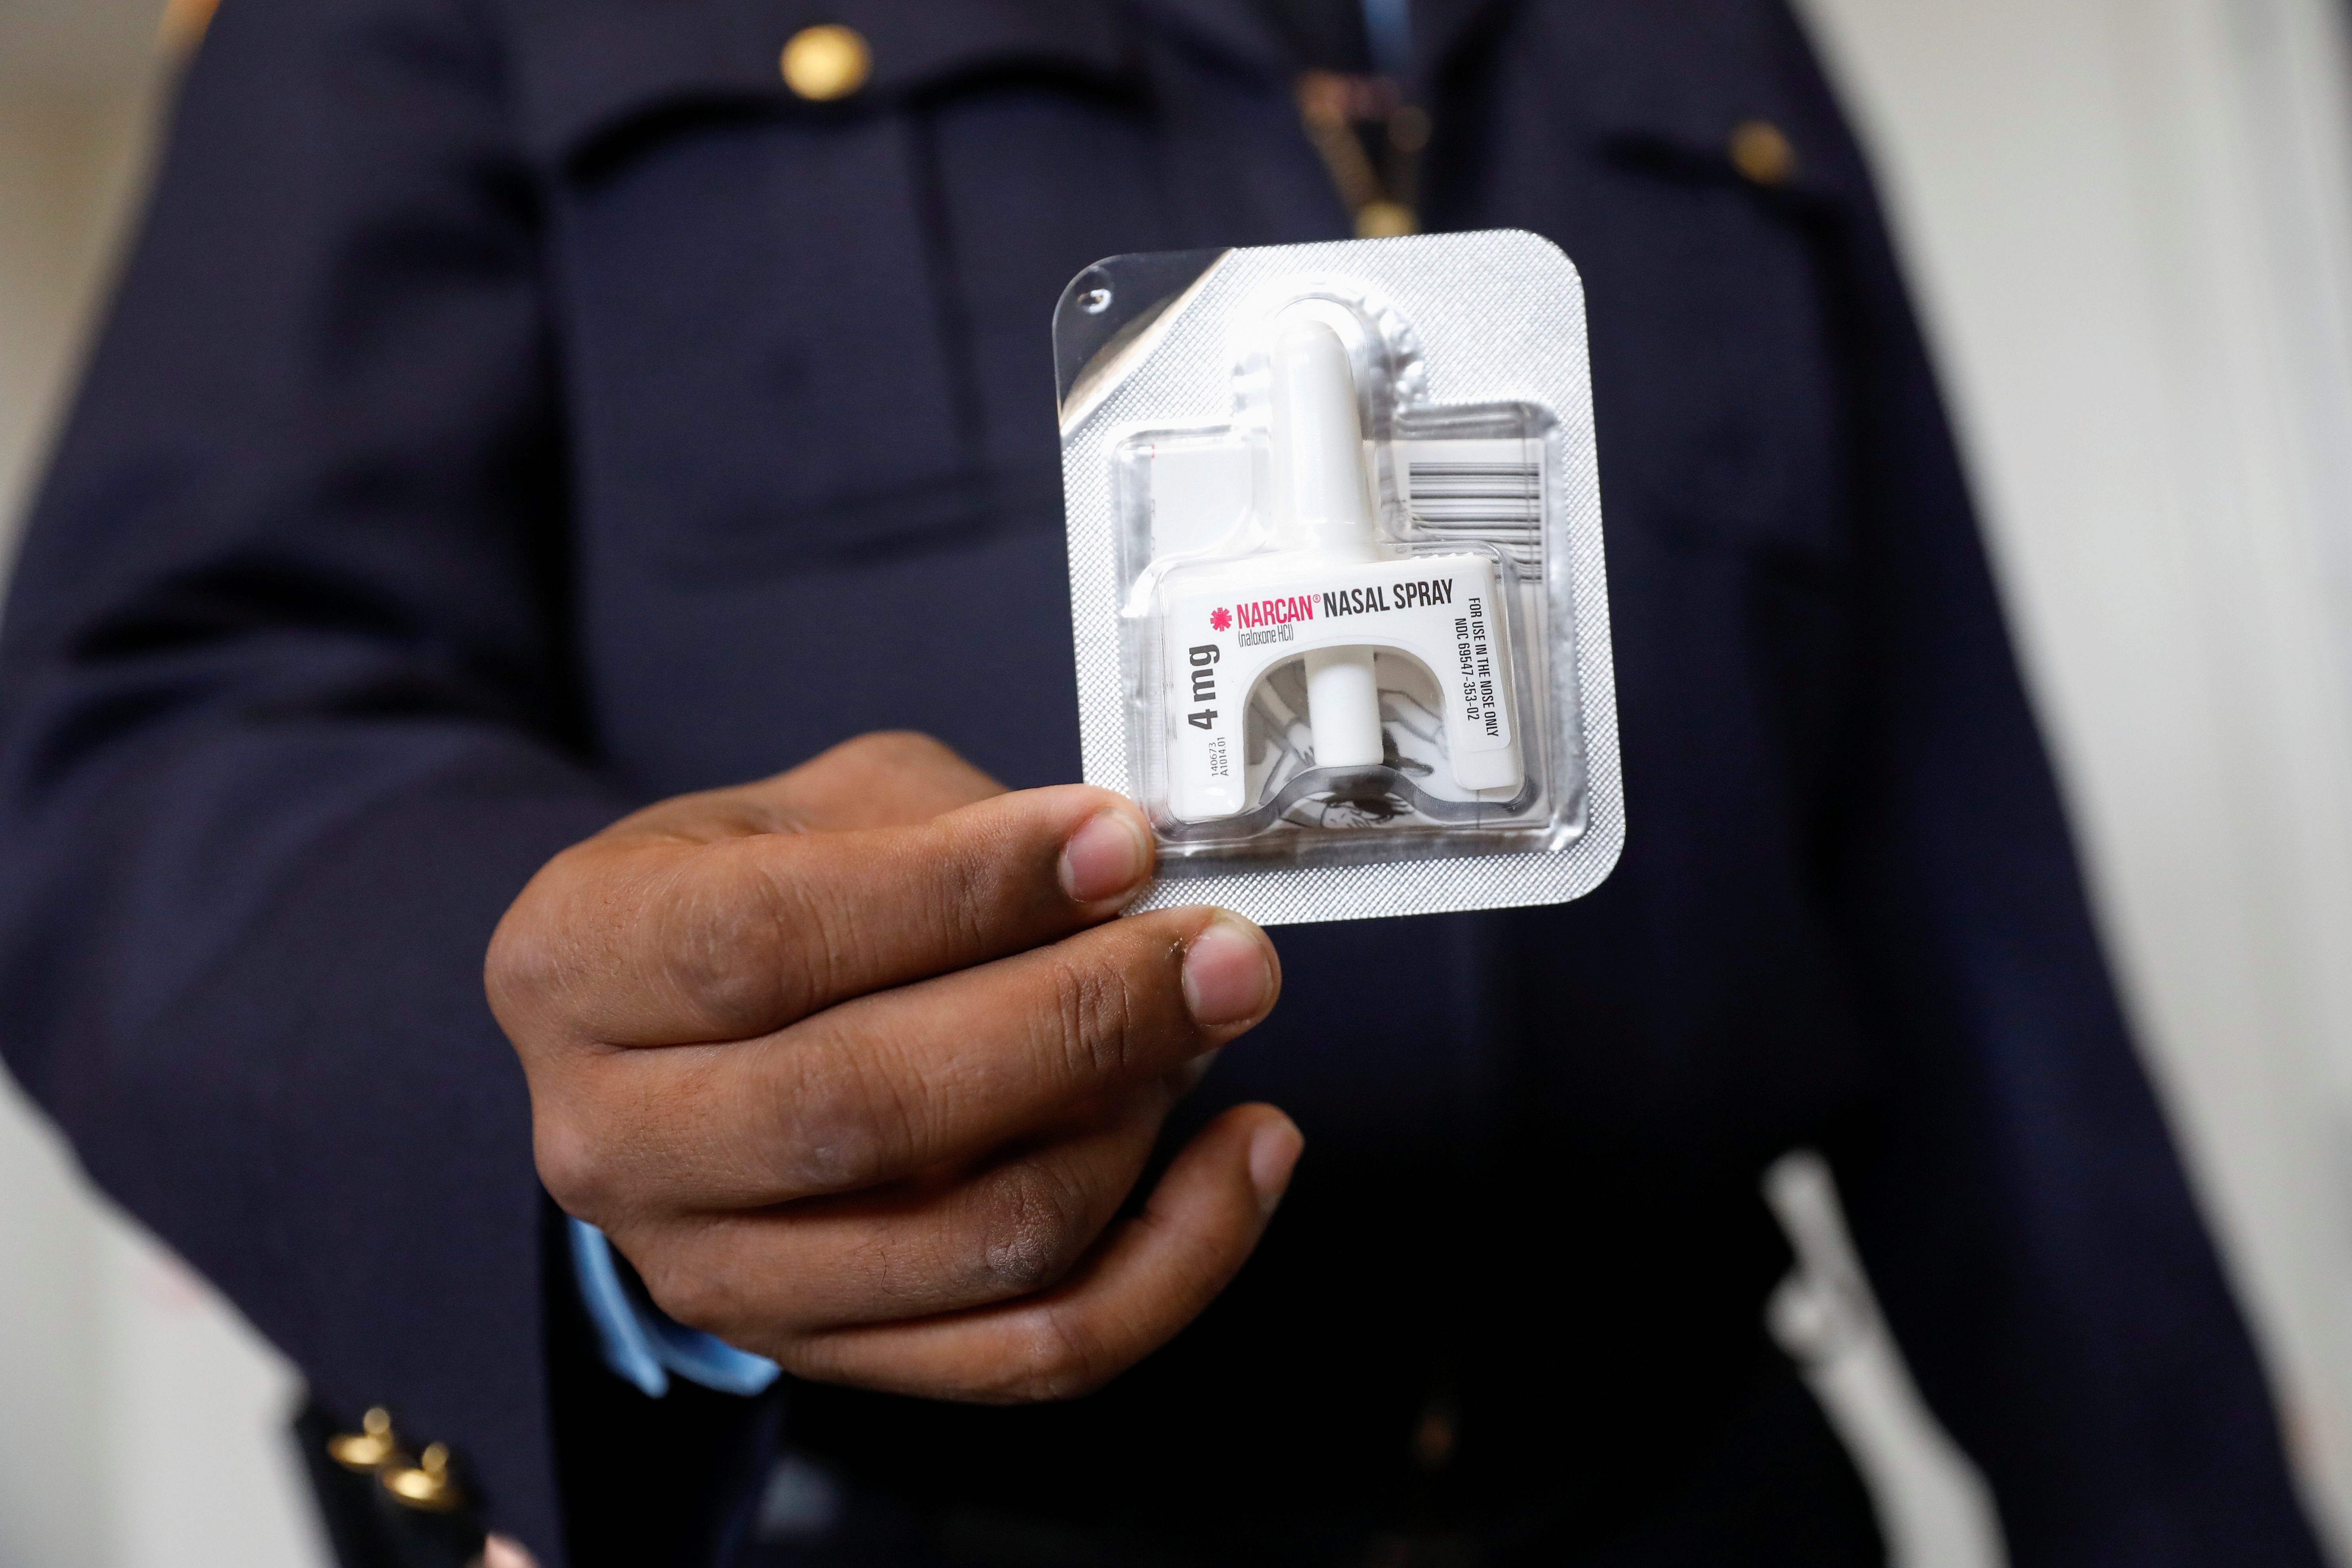 Corrections officer Anthony Willingham displays Naloxone nasal spray, part of an opioid anti-overdose medicine kit for inmates to take with them upon release, before a training session for inmates at the Queensboro Correctional Facility in Queens, New York, U.S., April 9, 2018. Picture taken April 9, 2018. REUTERS/Shannon Stapleton